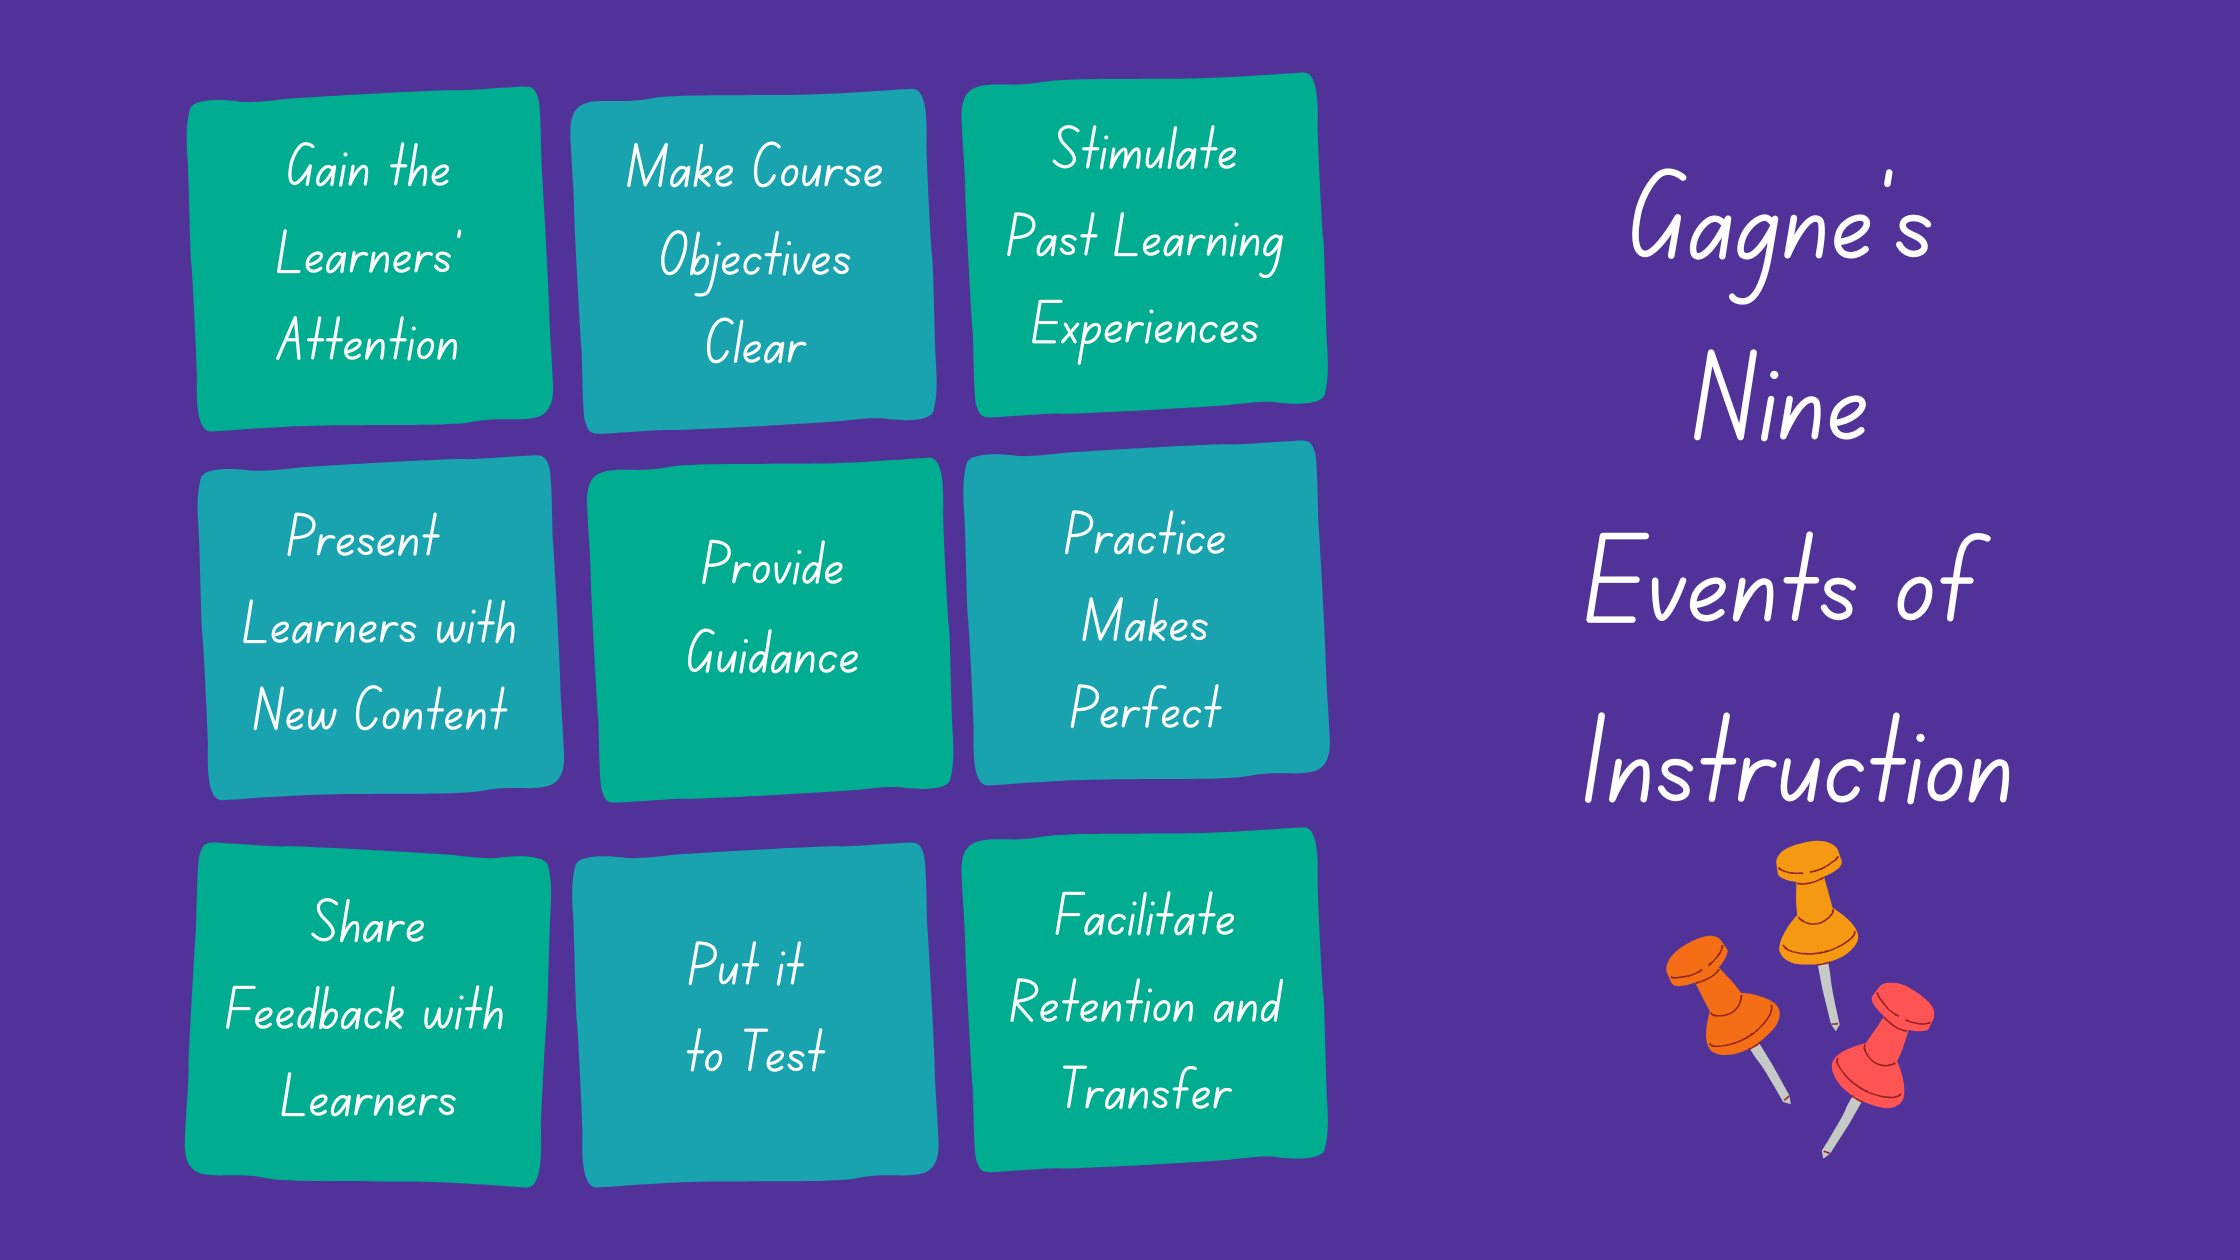 Instructional Design: Gagne's 9 Events of Instruction